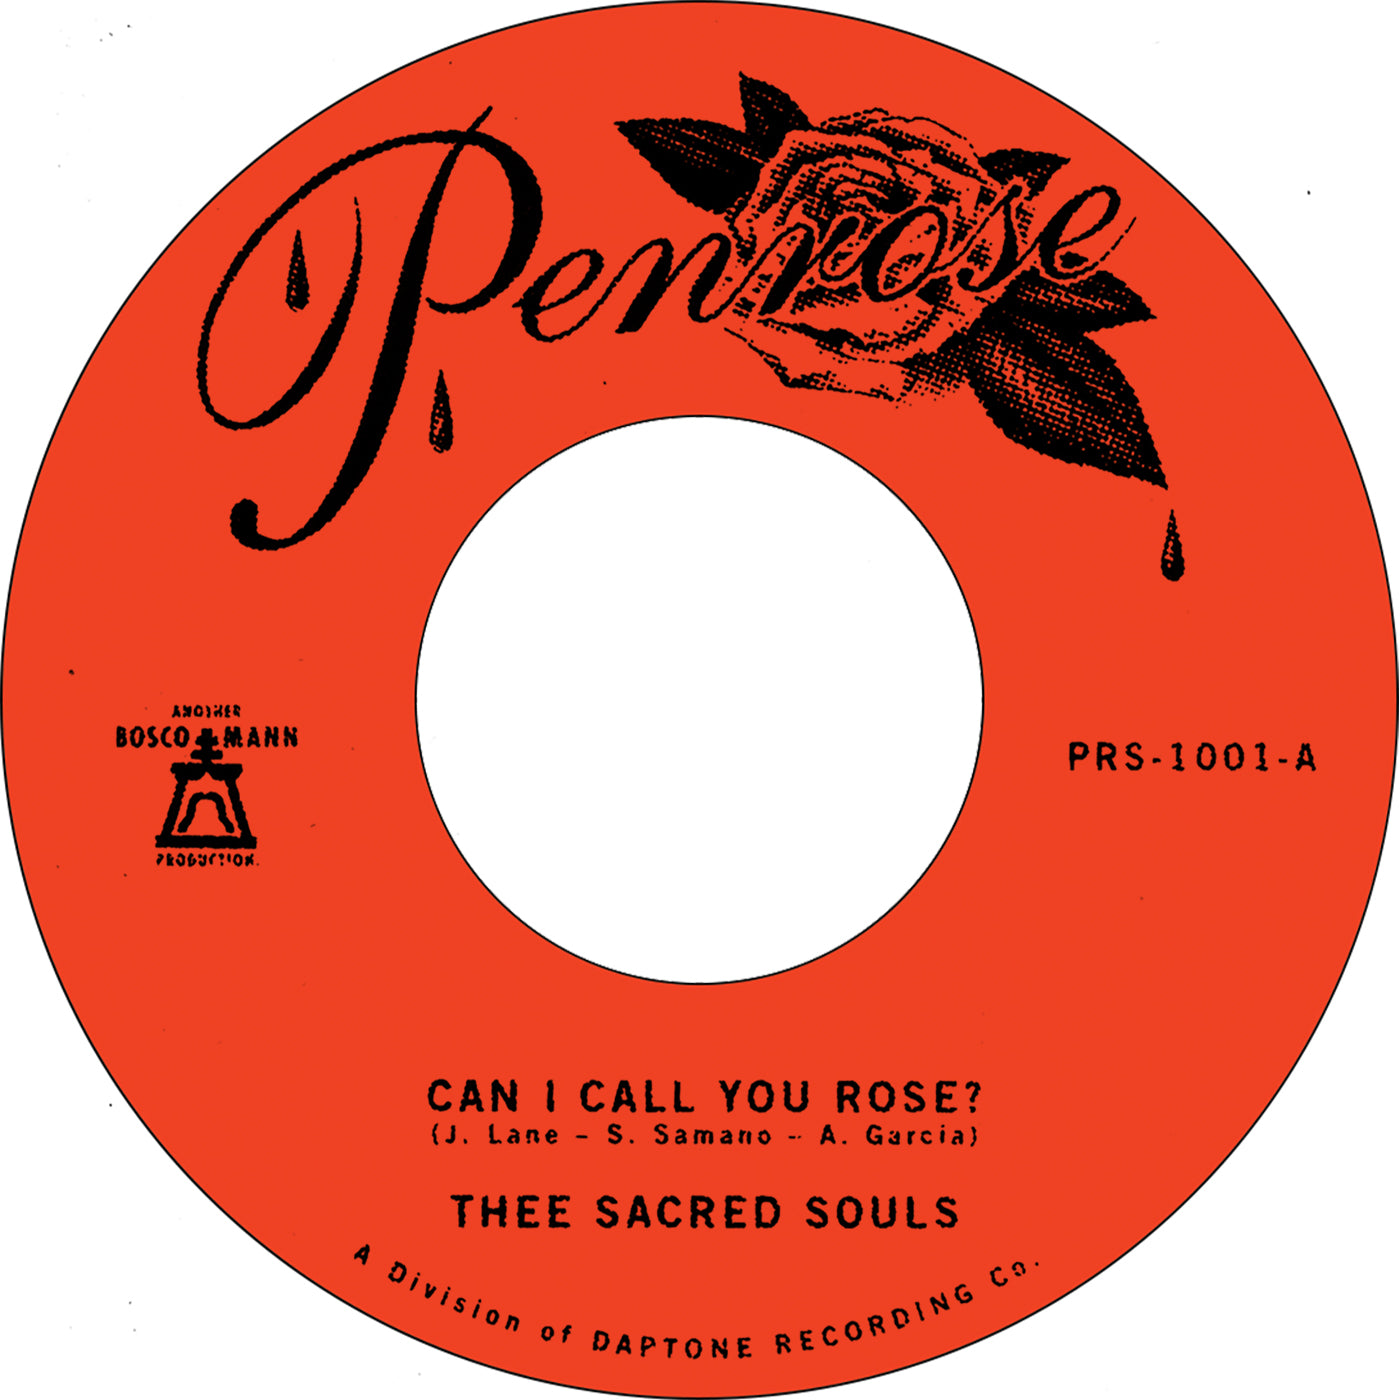 Thee Sacred Souls - "Can I Call You Rose?" / "Weak For Your Love" 45